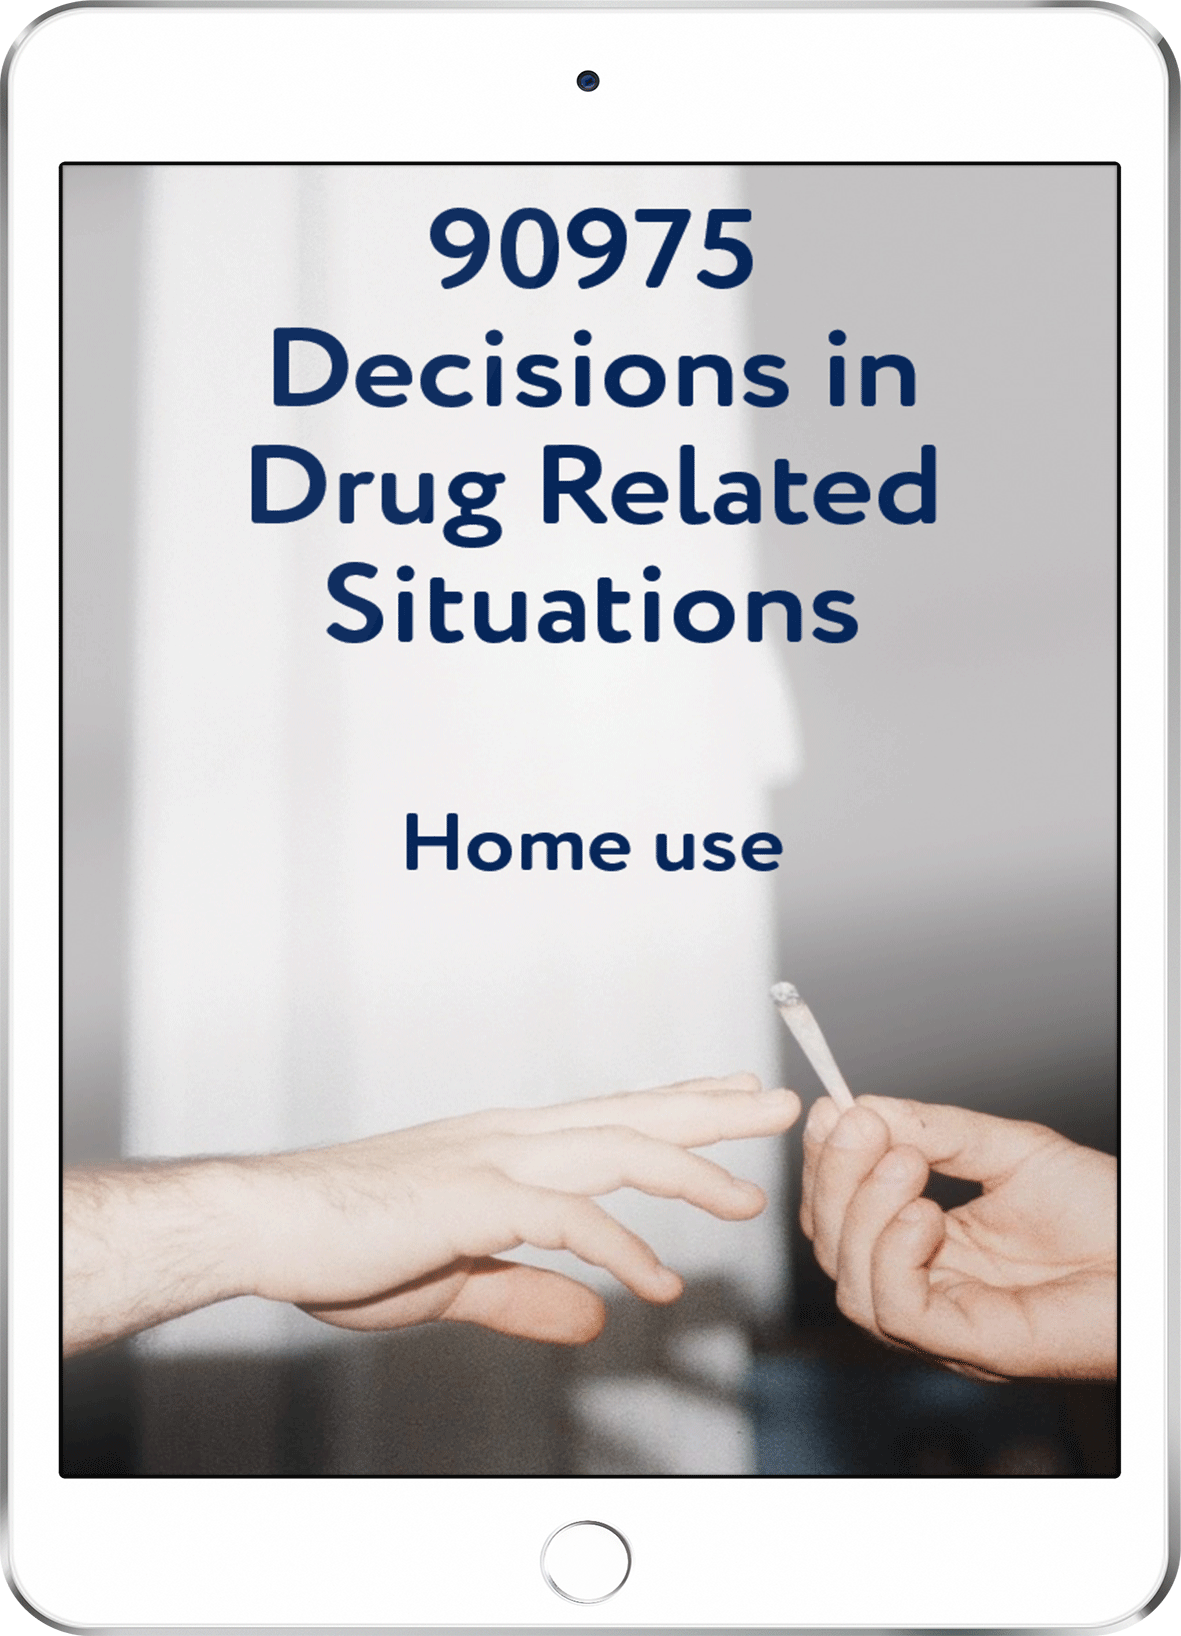 90975 Decisions in Drug Related Situations - Home Use